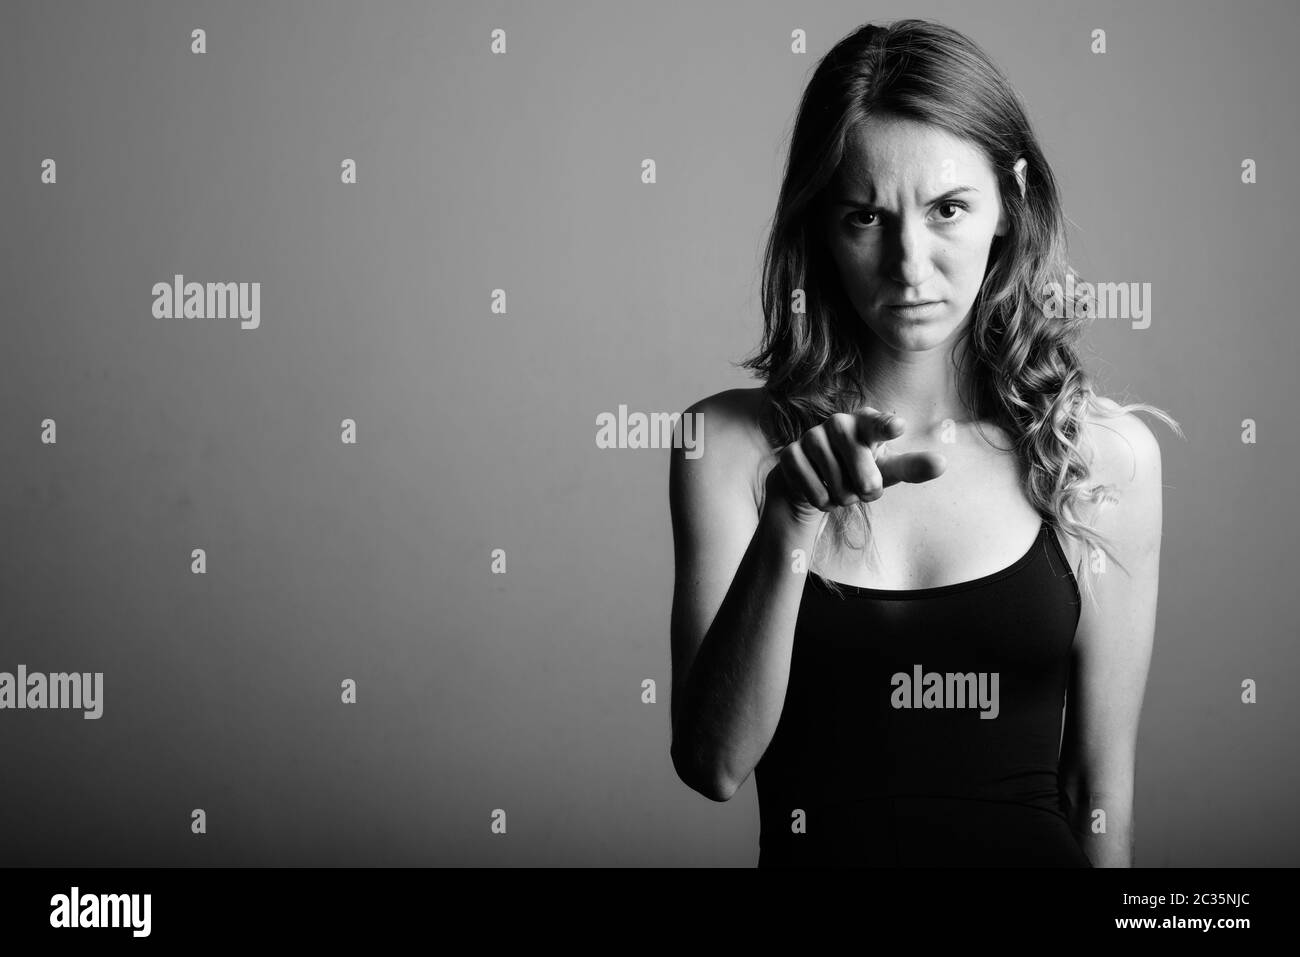 Young beautiful woman wearing sleeveless top against gray background Stock Photo